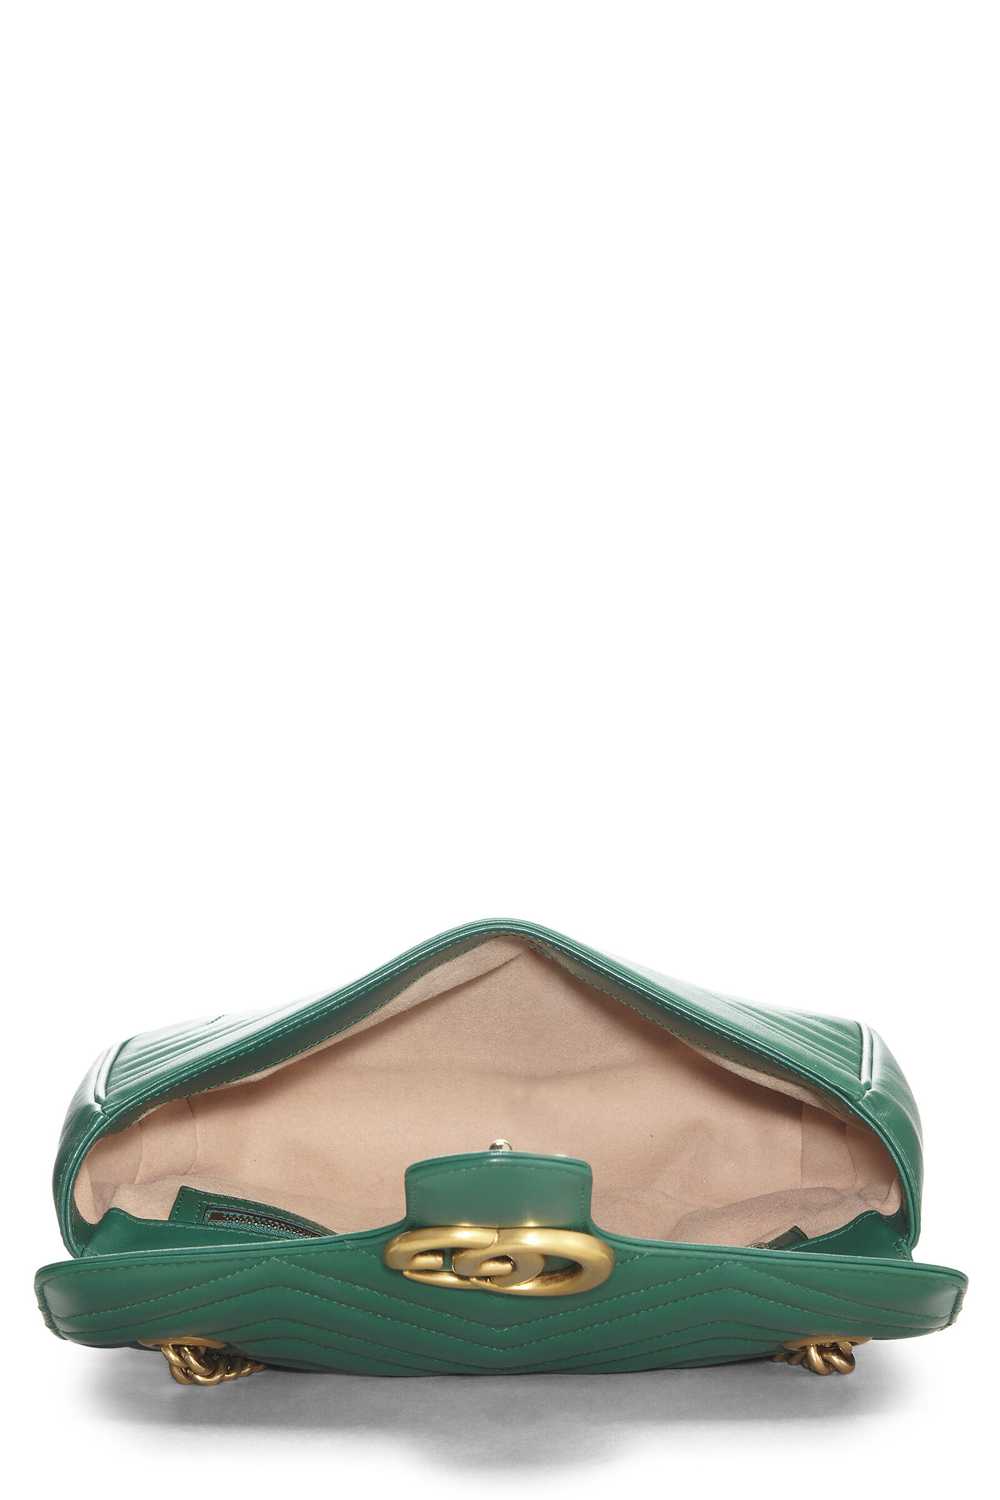 Green Leather GG Marmont Shoulder Bag Small - image 6